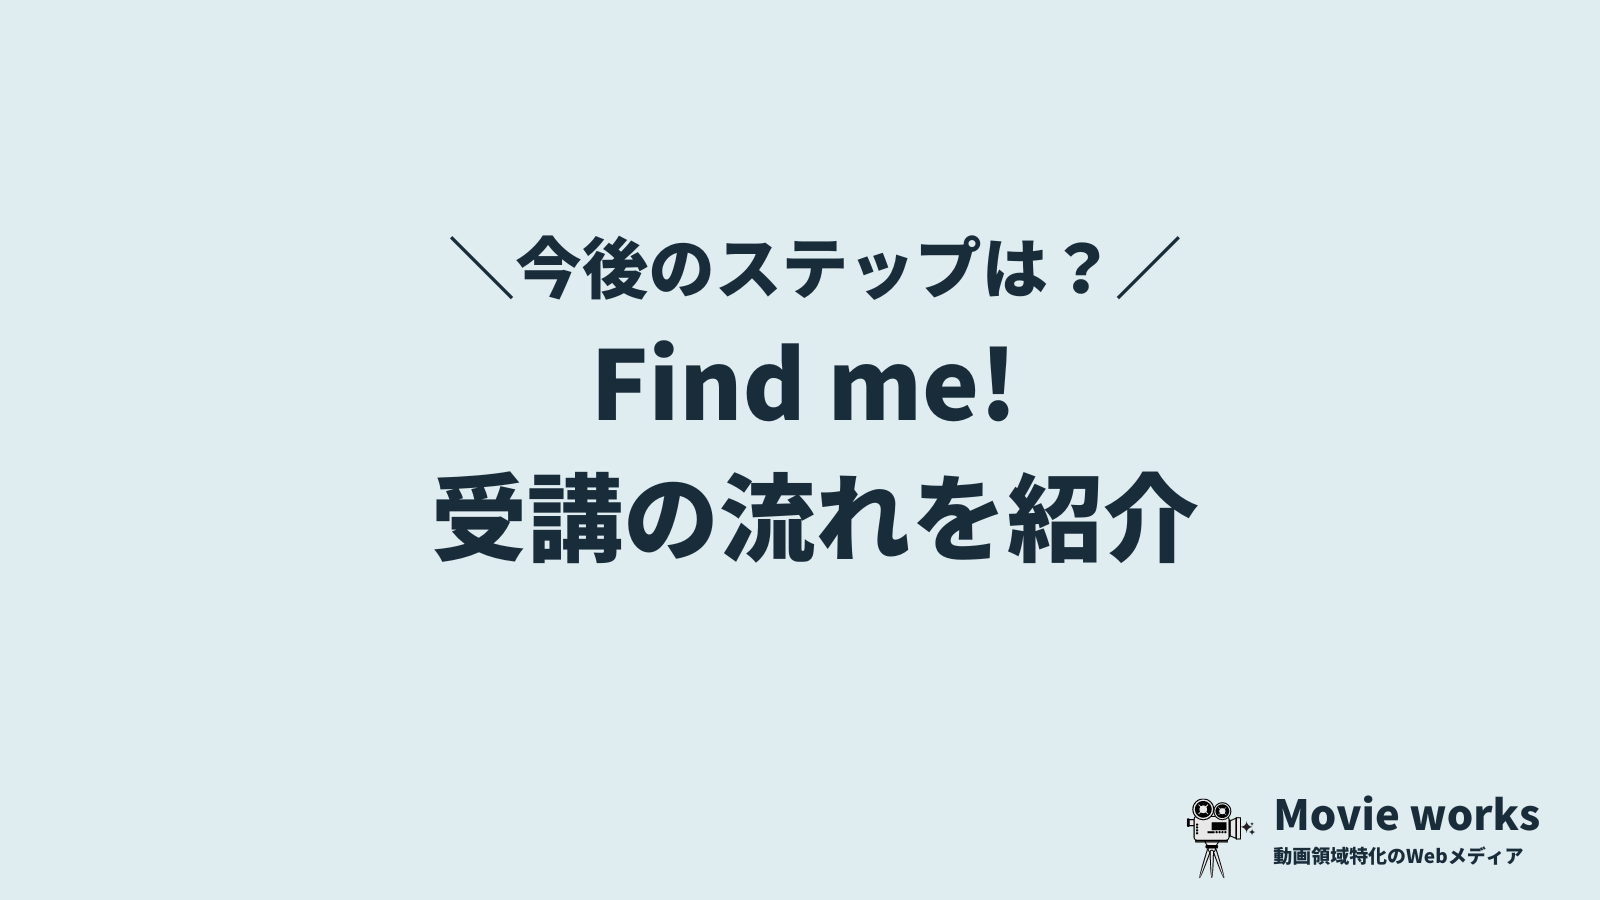 Find me!を受講する流れ